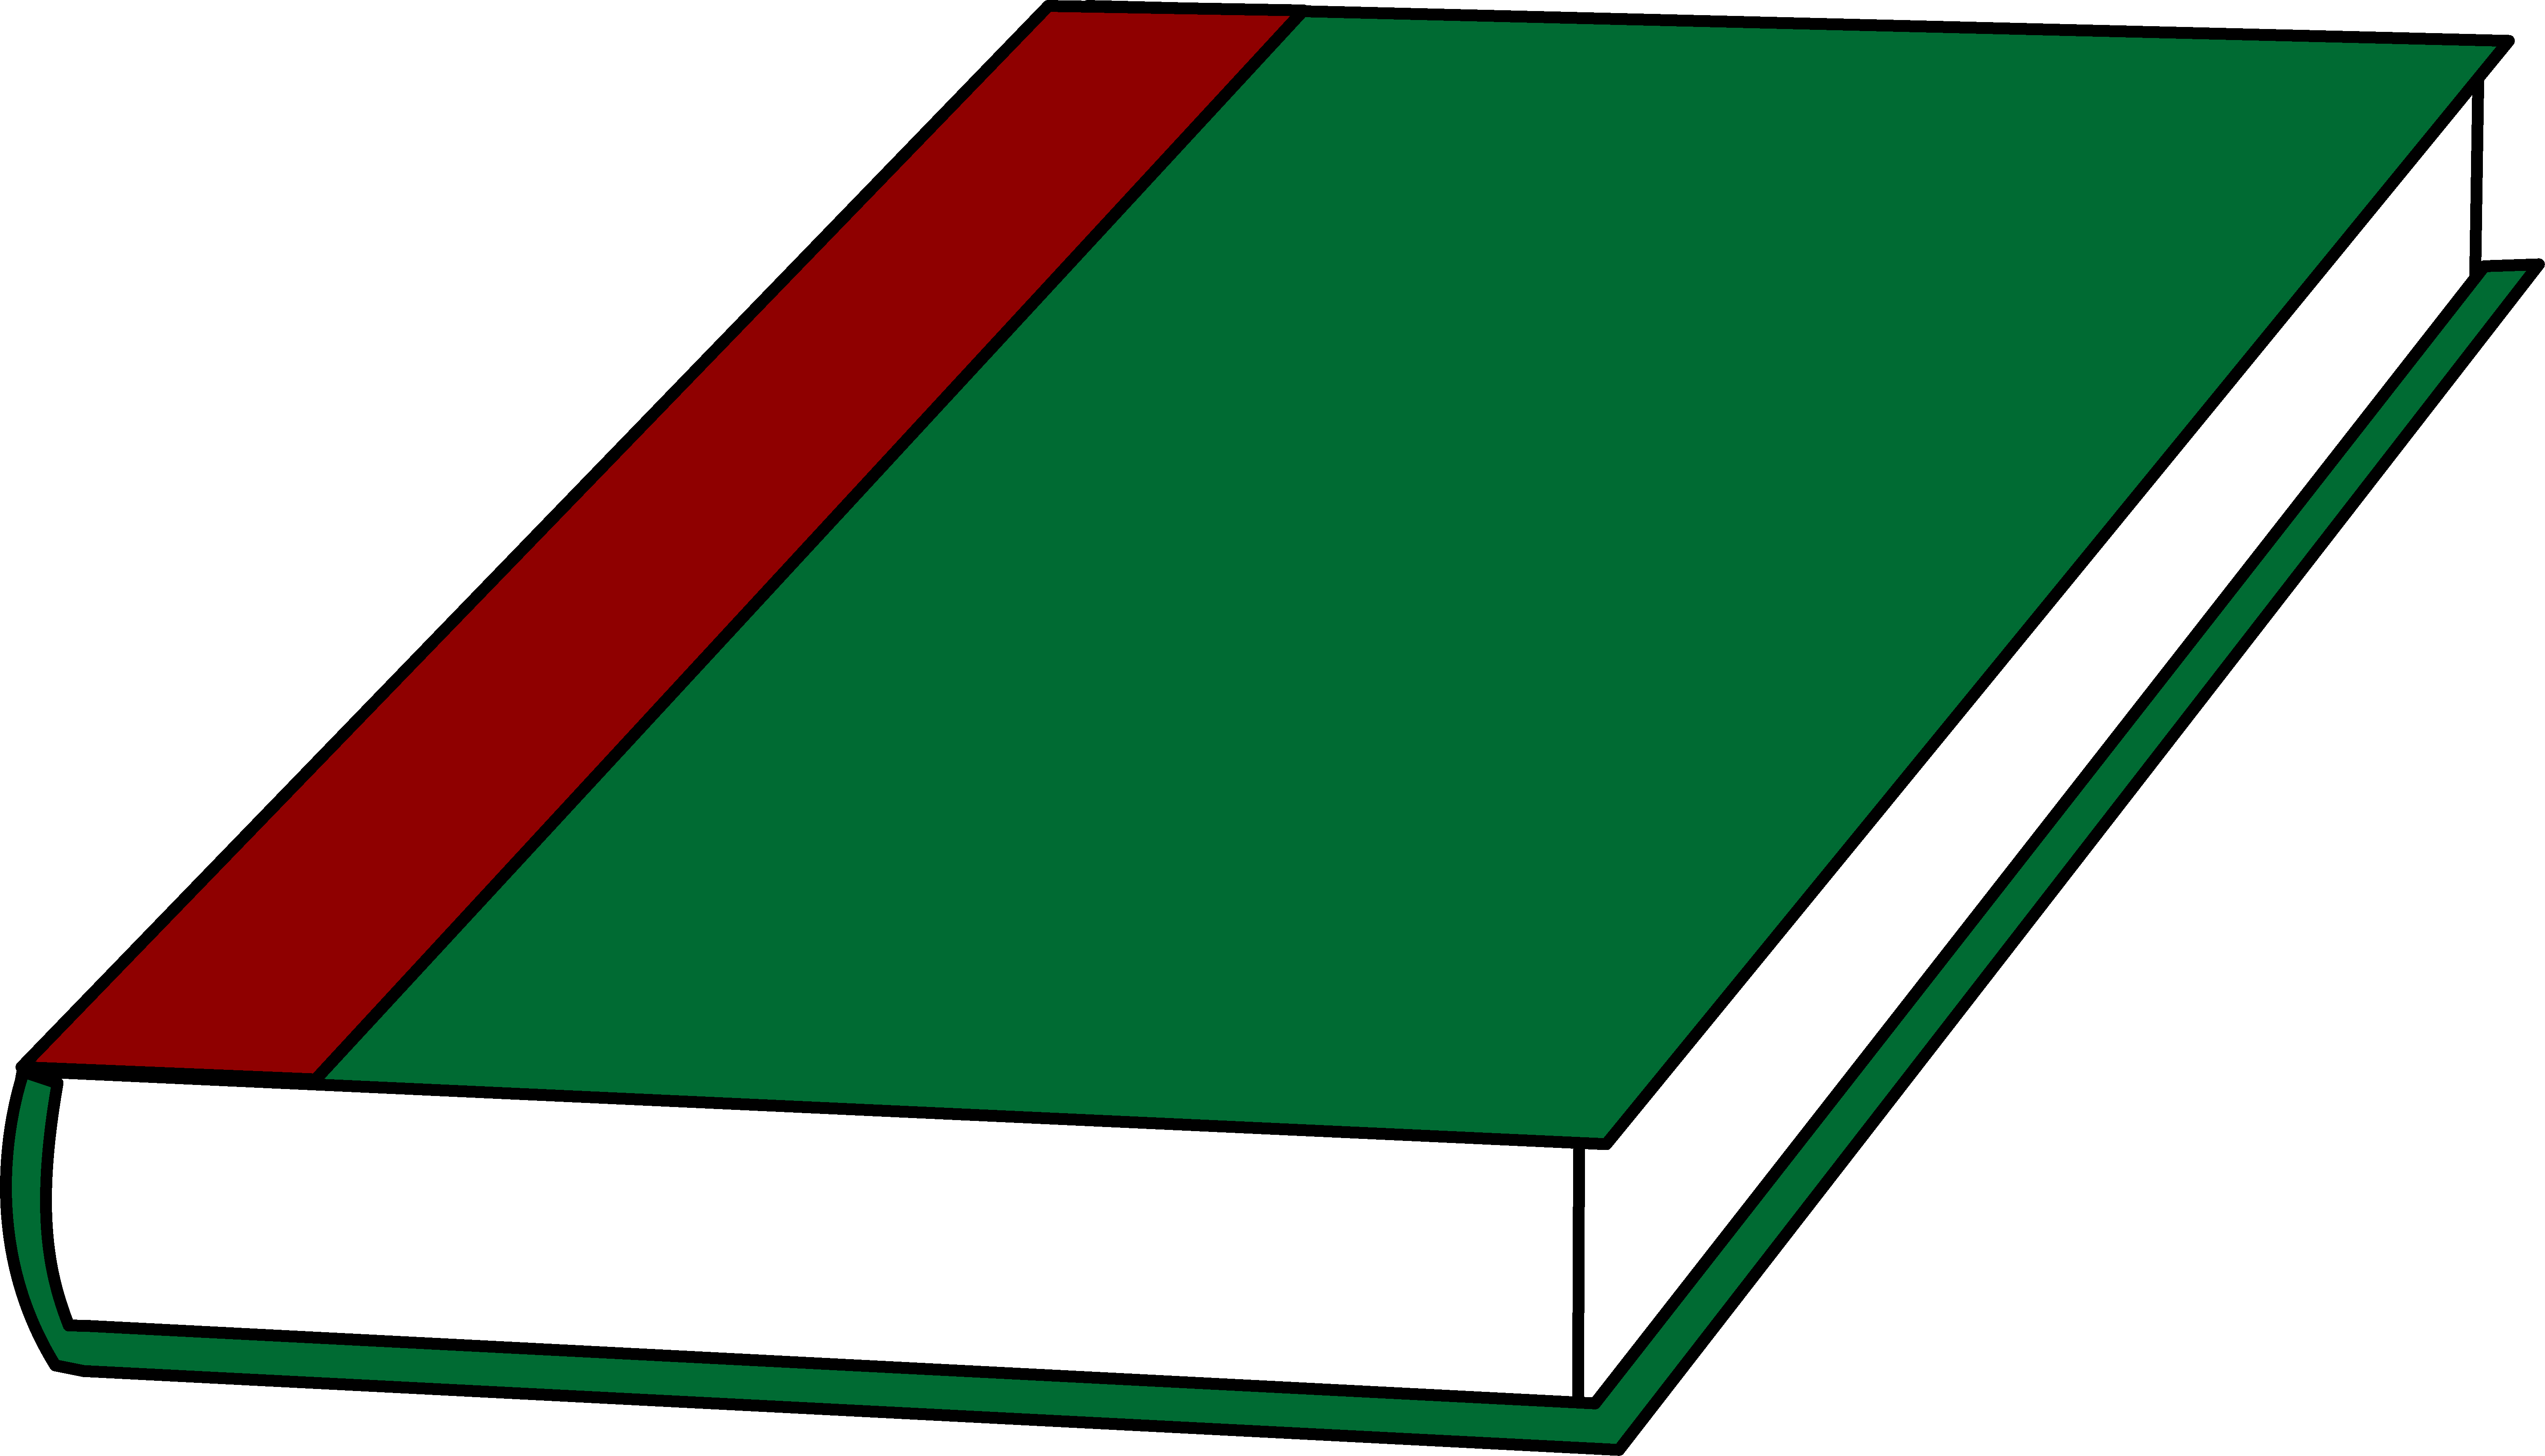 A Book With a Green Cover - Free Clip Art